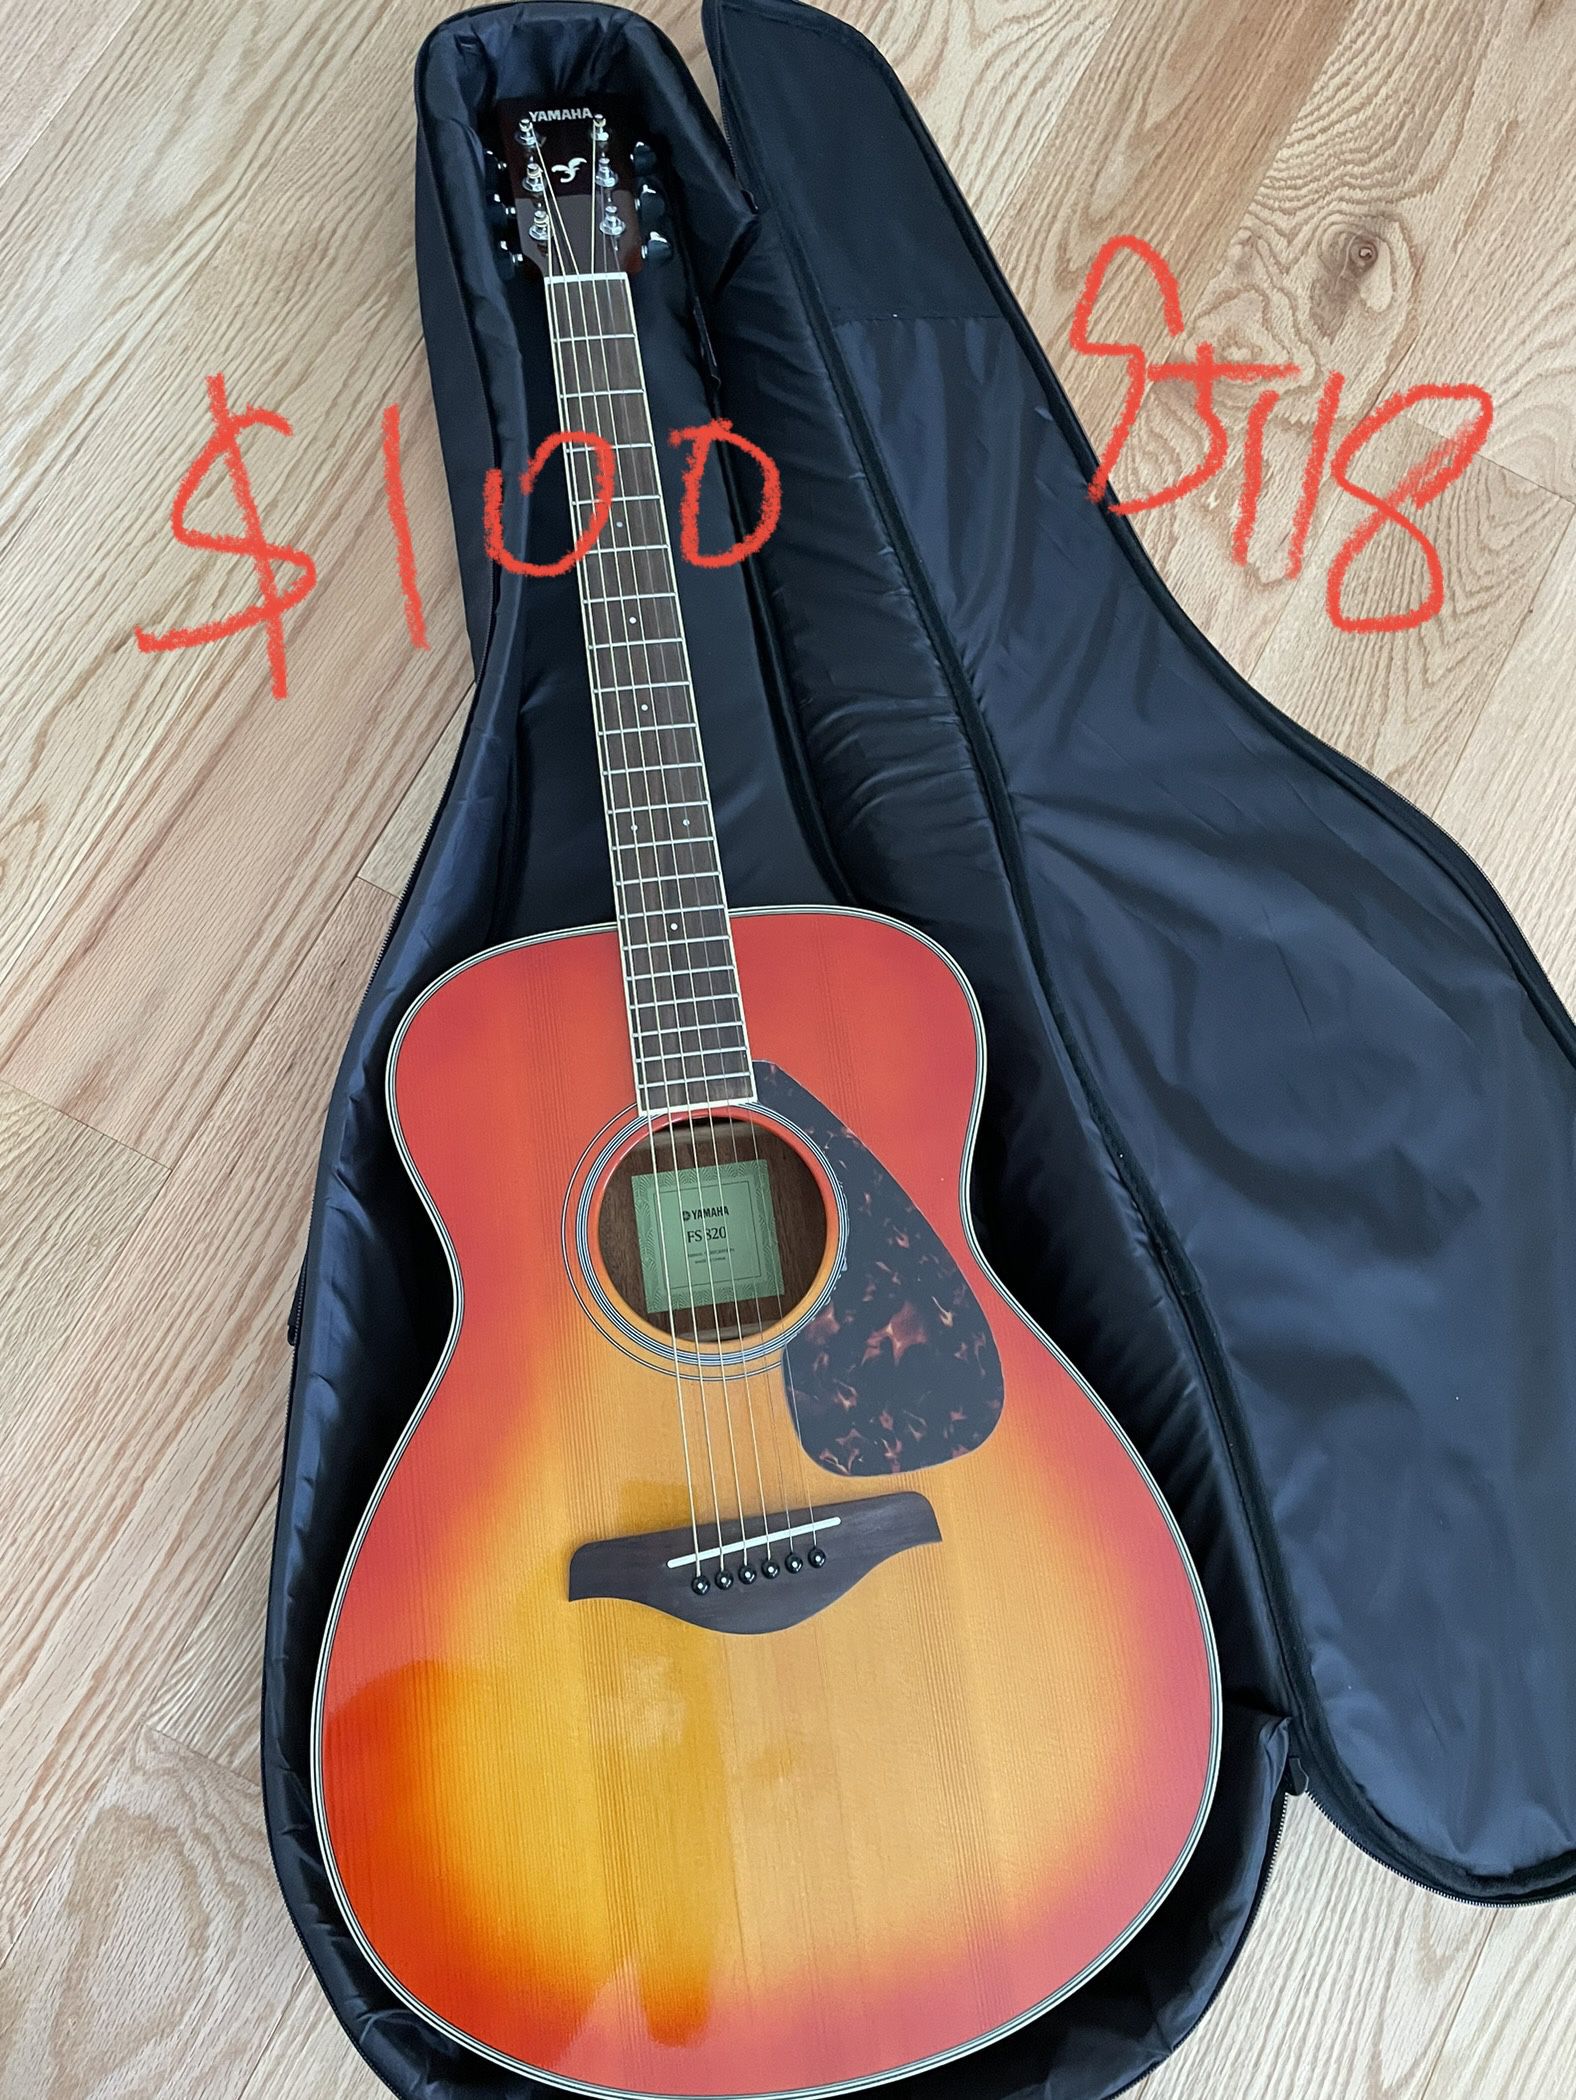 Yamaha FS820 Acoustic Guitar for Sale in San Jose, CA - OfferUp